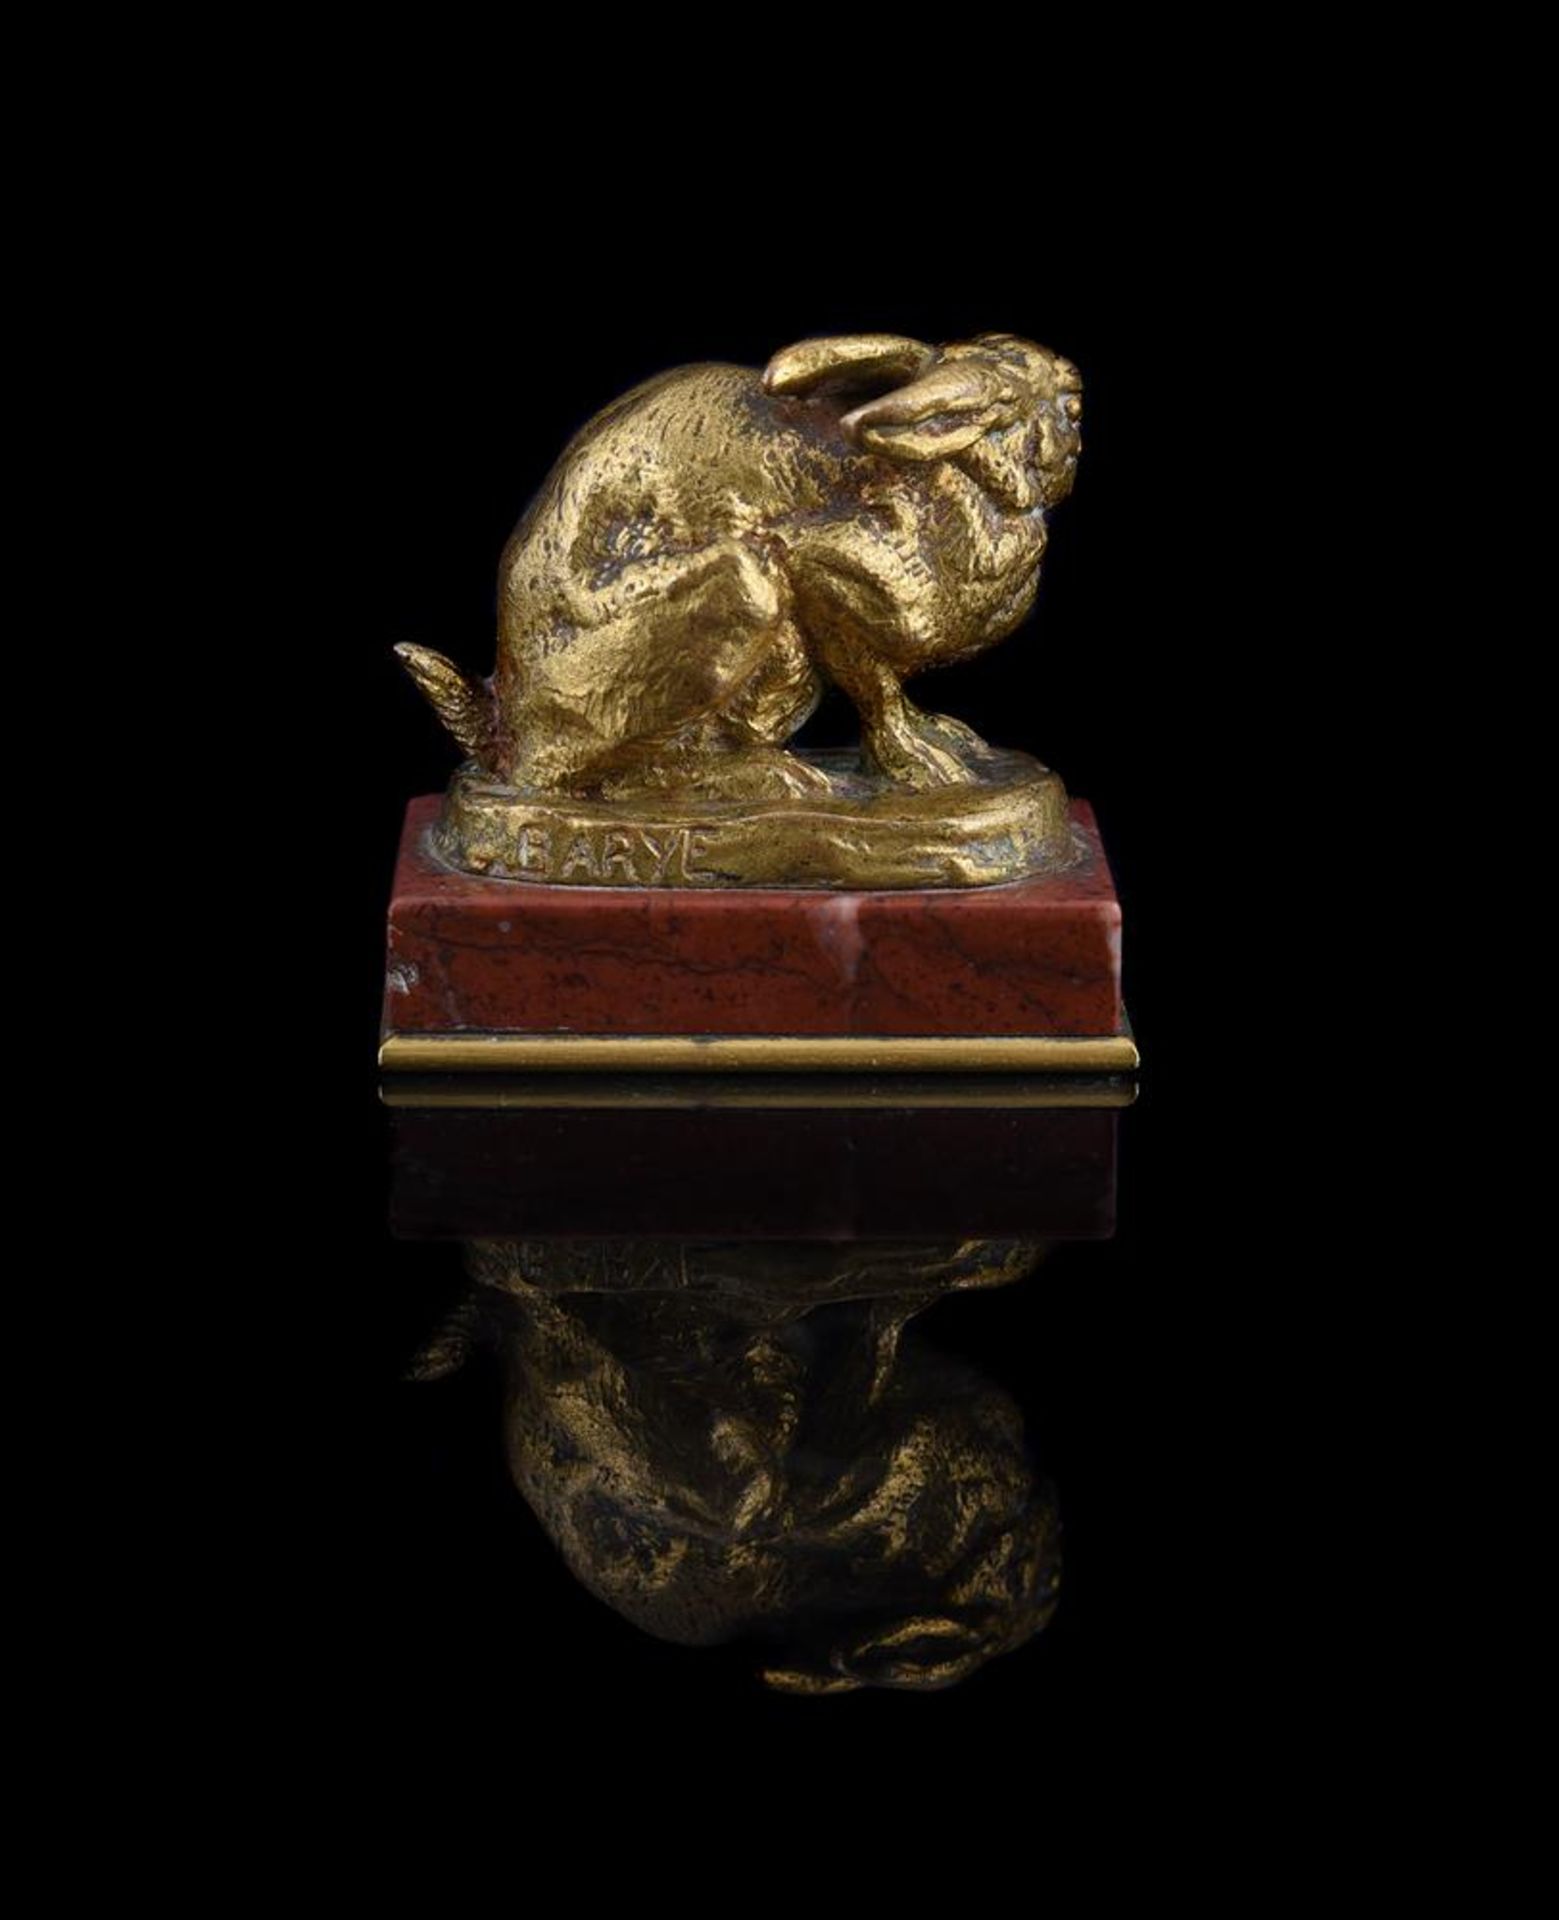 ANTOINE-LOUIS BARYE (FRENCH, 1795-1875), A GILT BRONZE MODEL OF A CROUCHING RABBIT - Image 4 of 7